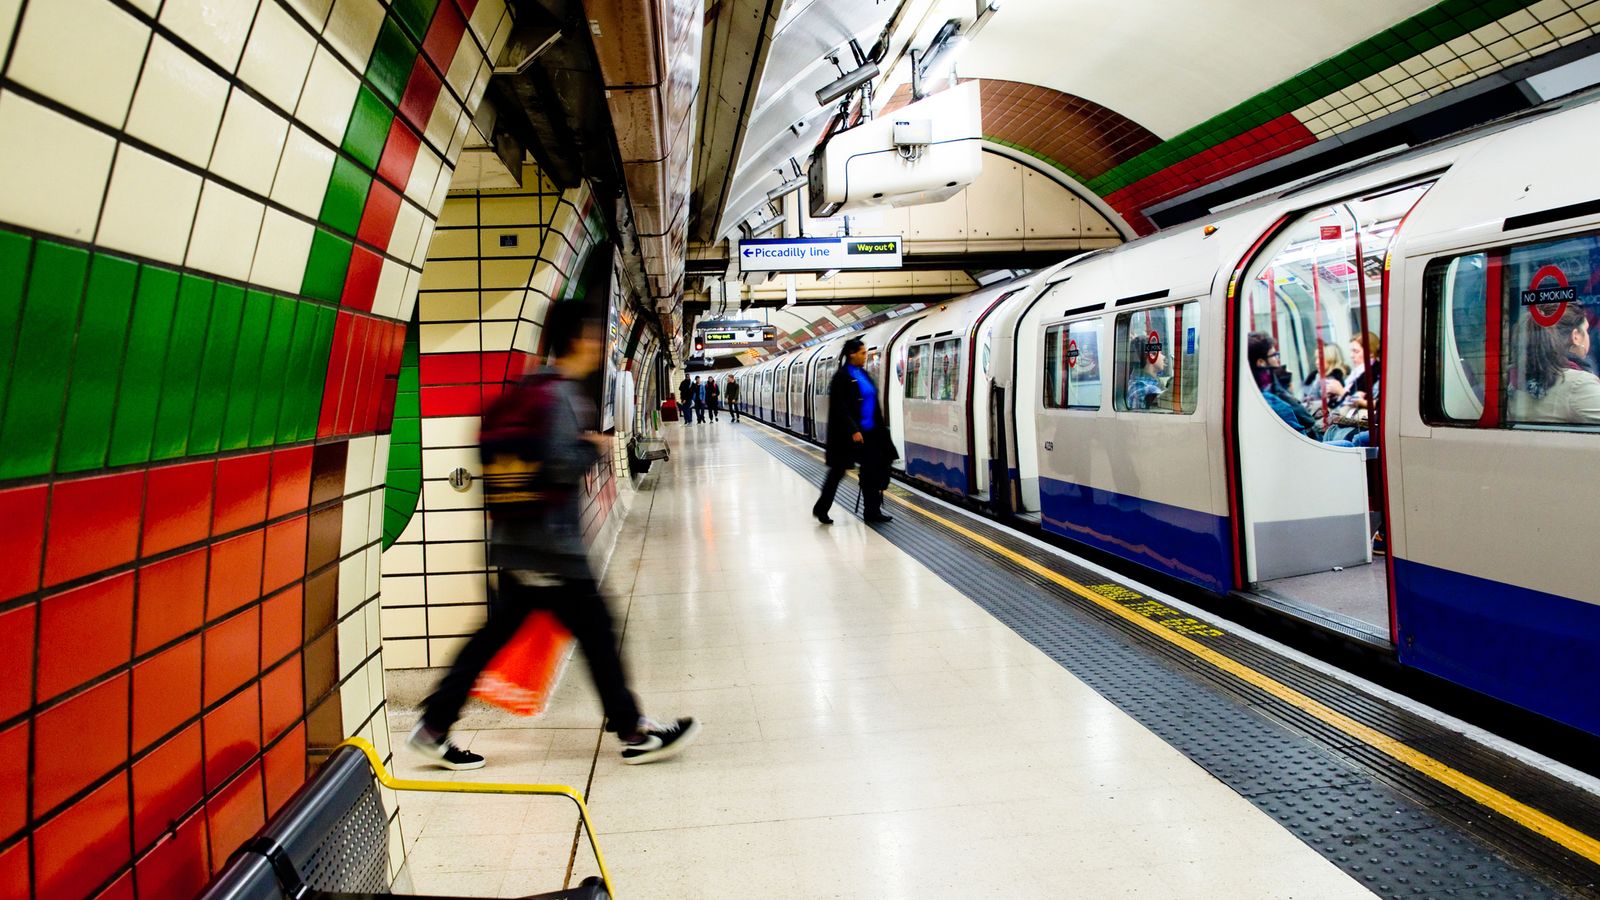 Man who raped woman in front of other passengers on London Underground jailed